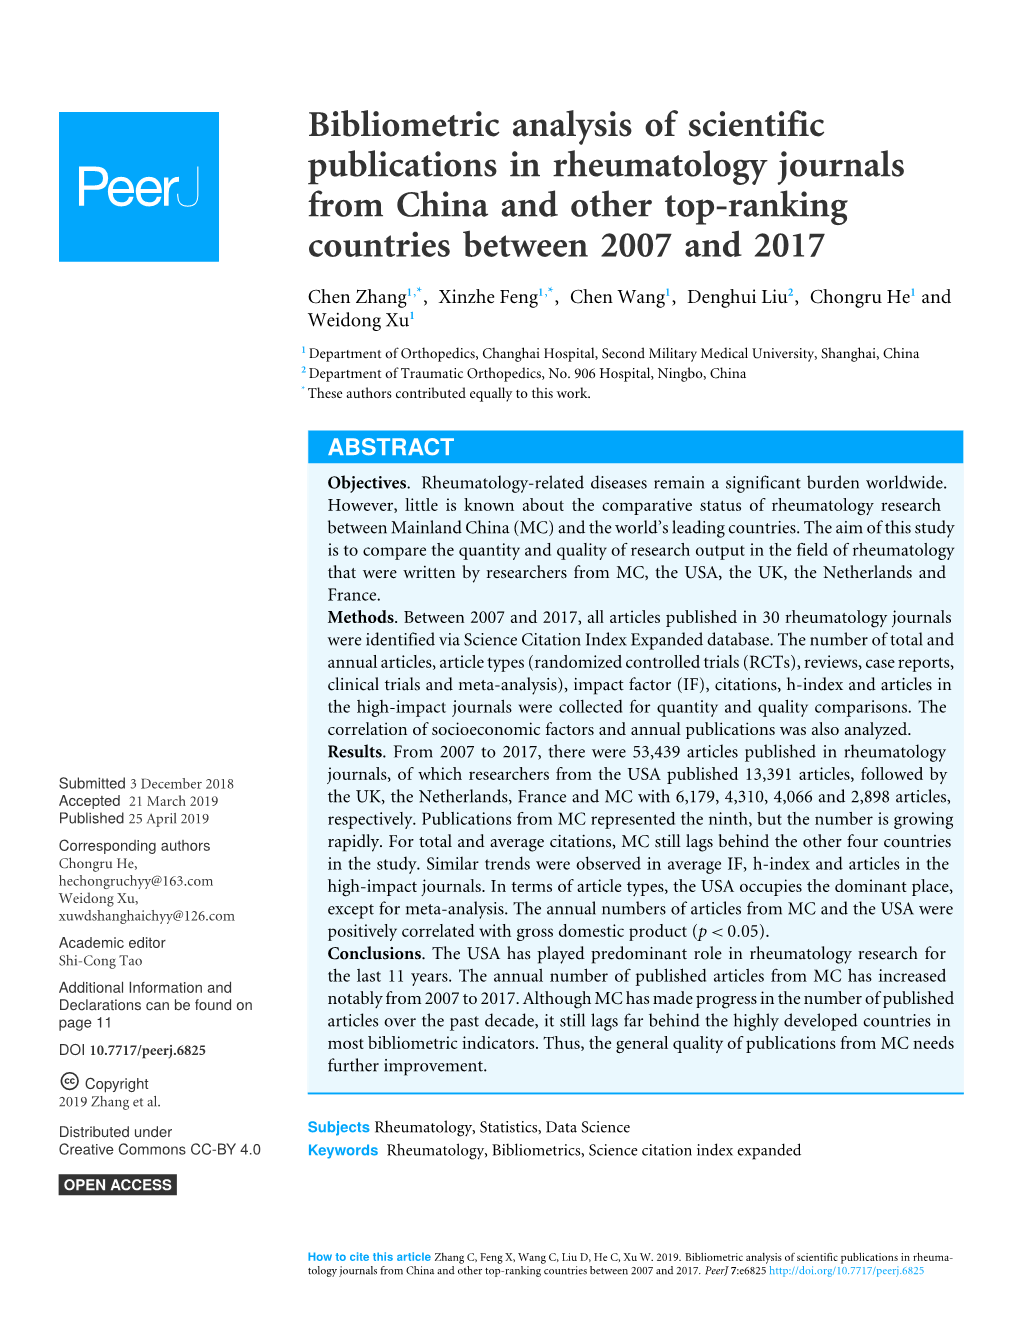 Bibliometric Analysis of Scientific Publications in Rheumatology Journals from China and Other Top-Ranking Countries Between 2007 and 2017